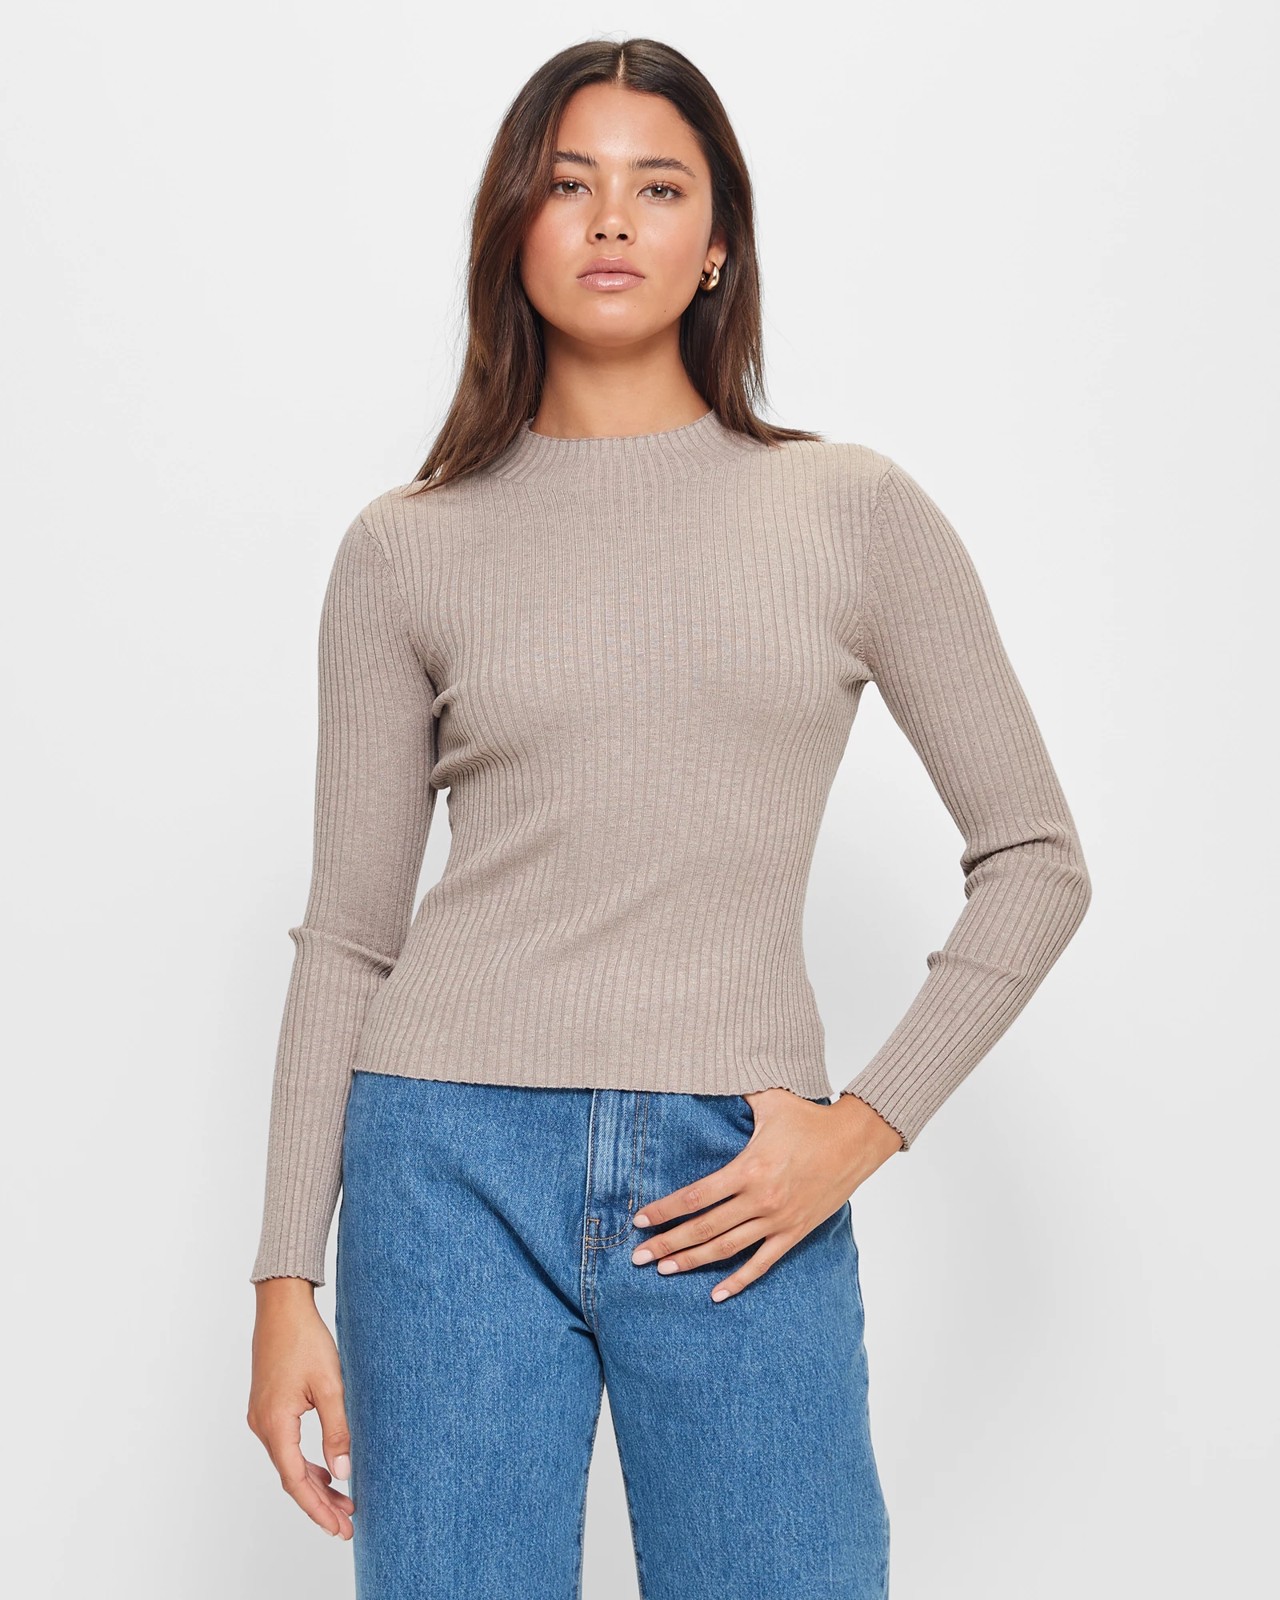 Abbi Long Sleeve Mock Neck Pointelle Knit Sweater Top Taupe – Miss